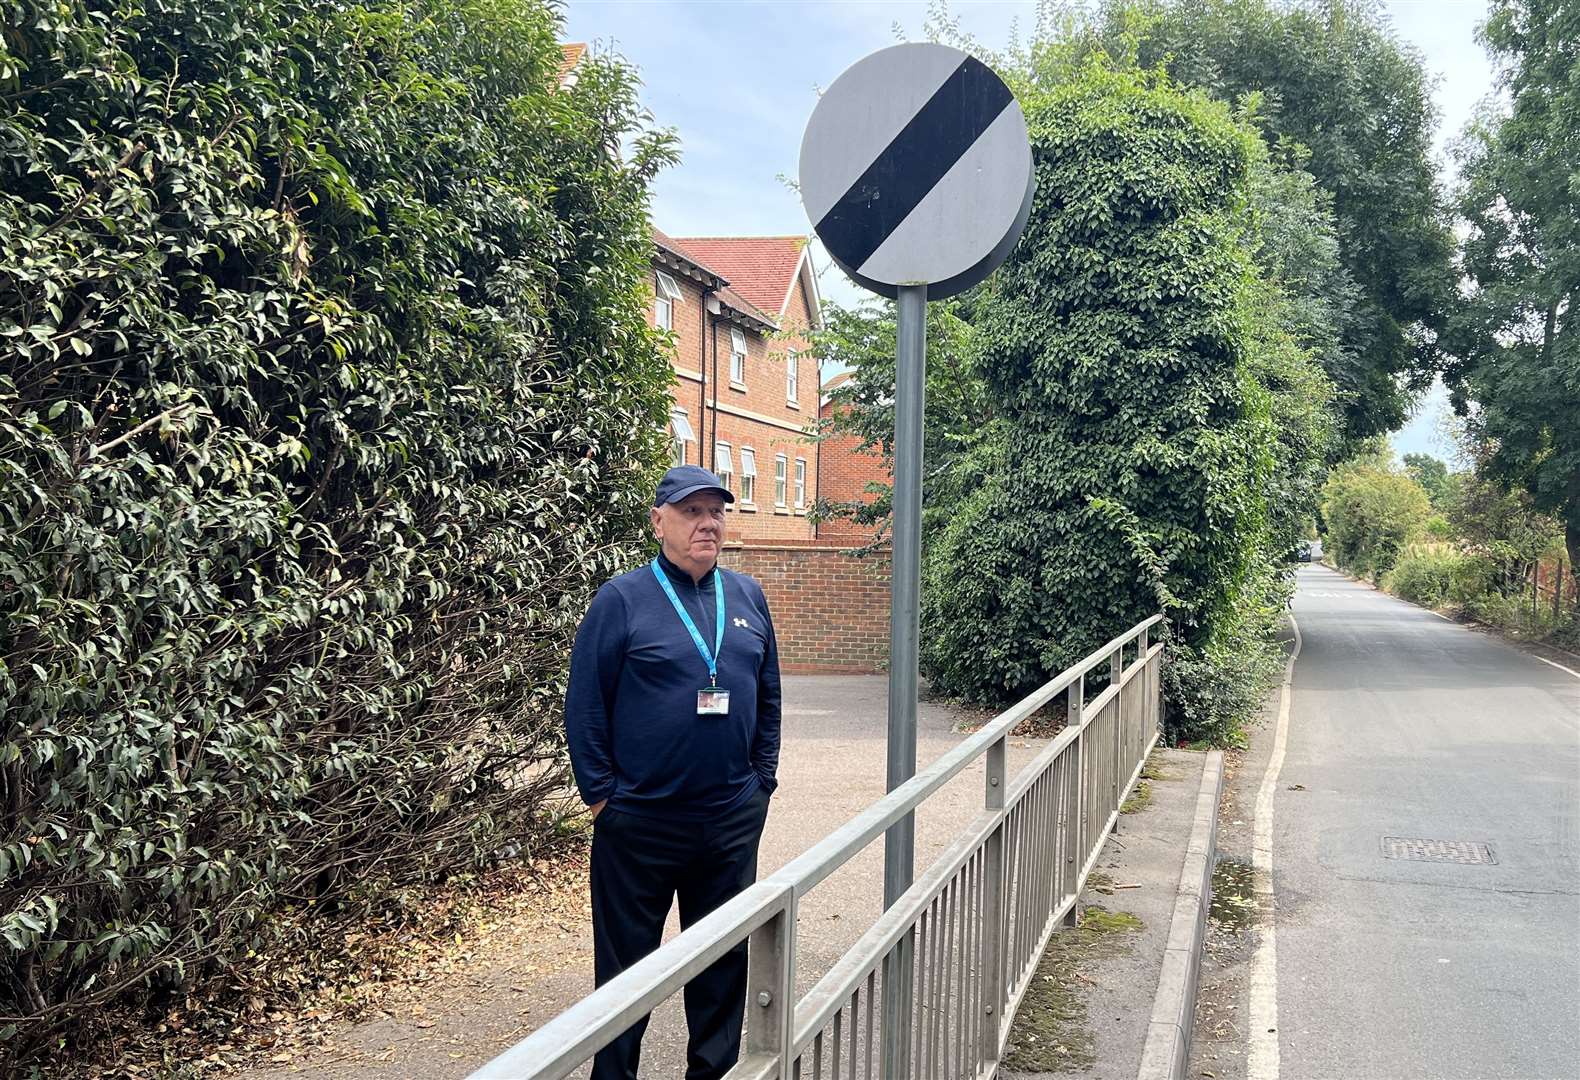 Cllr James Hall at the national speed limit sign along Tonge Road, Murston